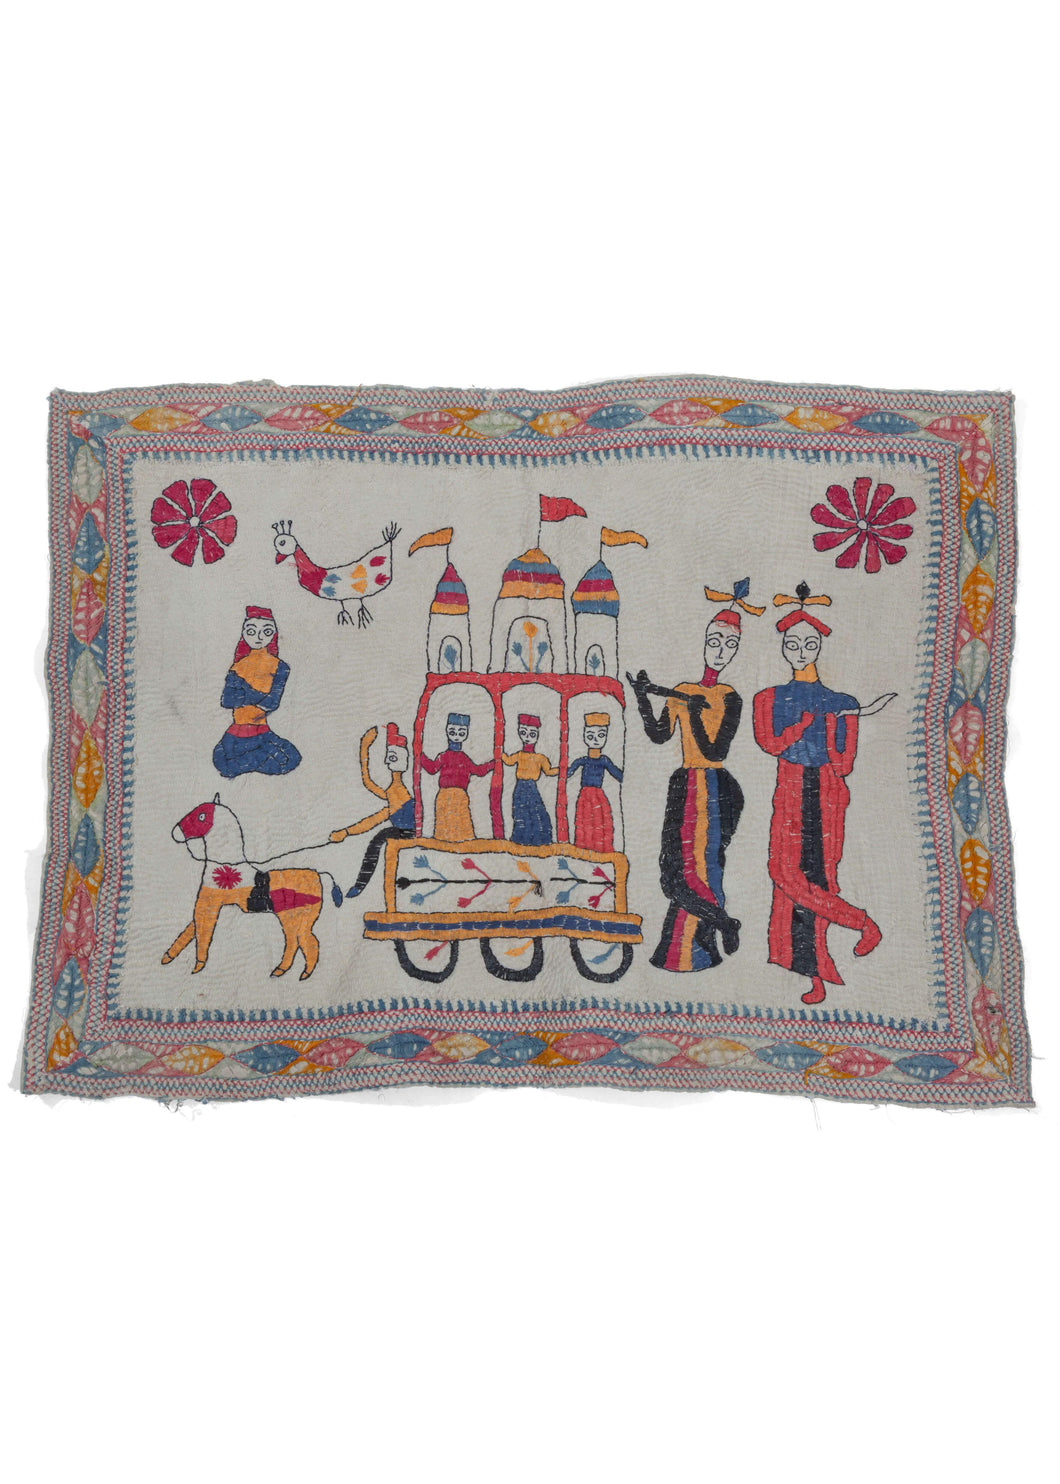 Antique Bengali hand embroidered Nakshi Kantha textile featuring three borders, one with leaves and an embroidered scene of a wedding procession with musicians and a floating yogi on a hand quilted off-white cotton